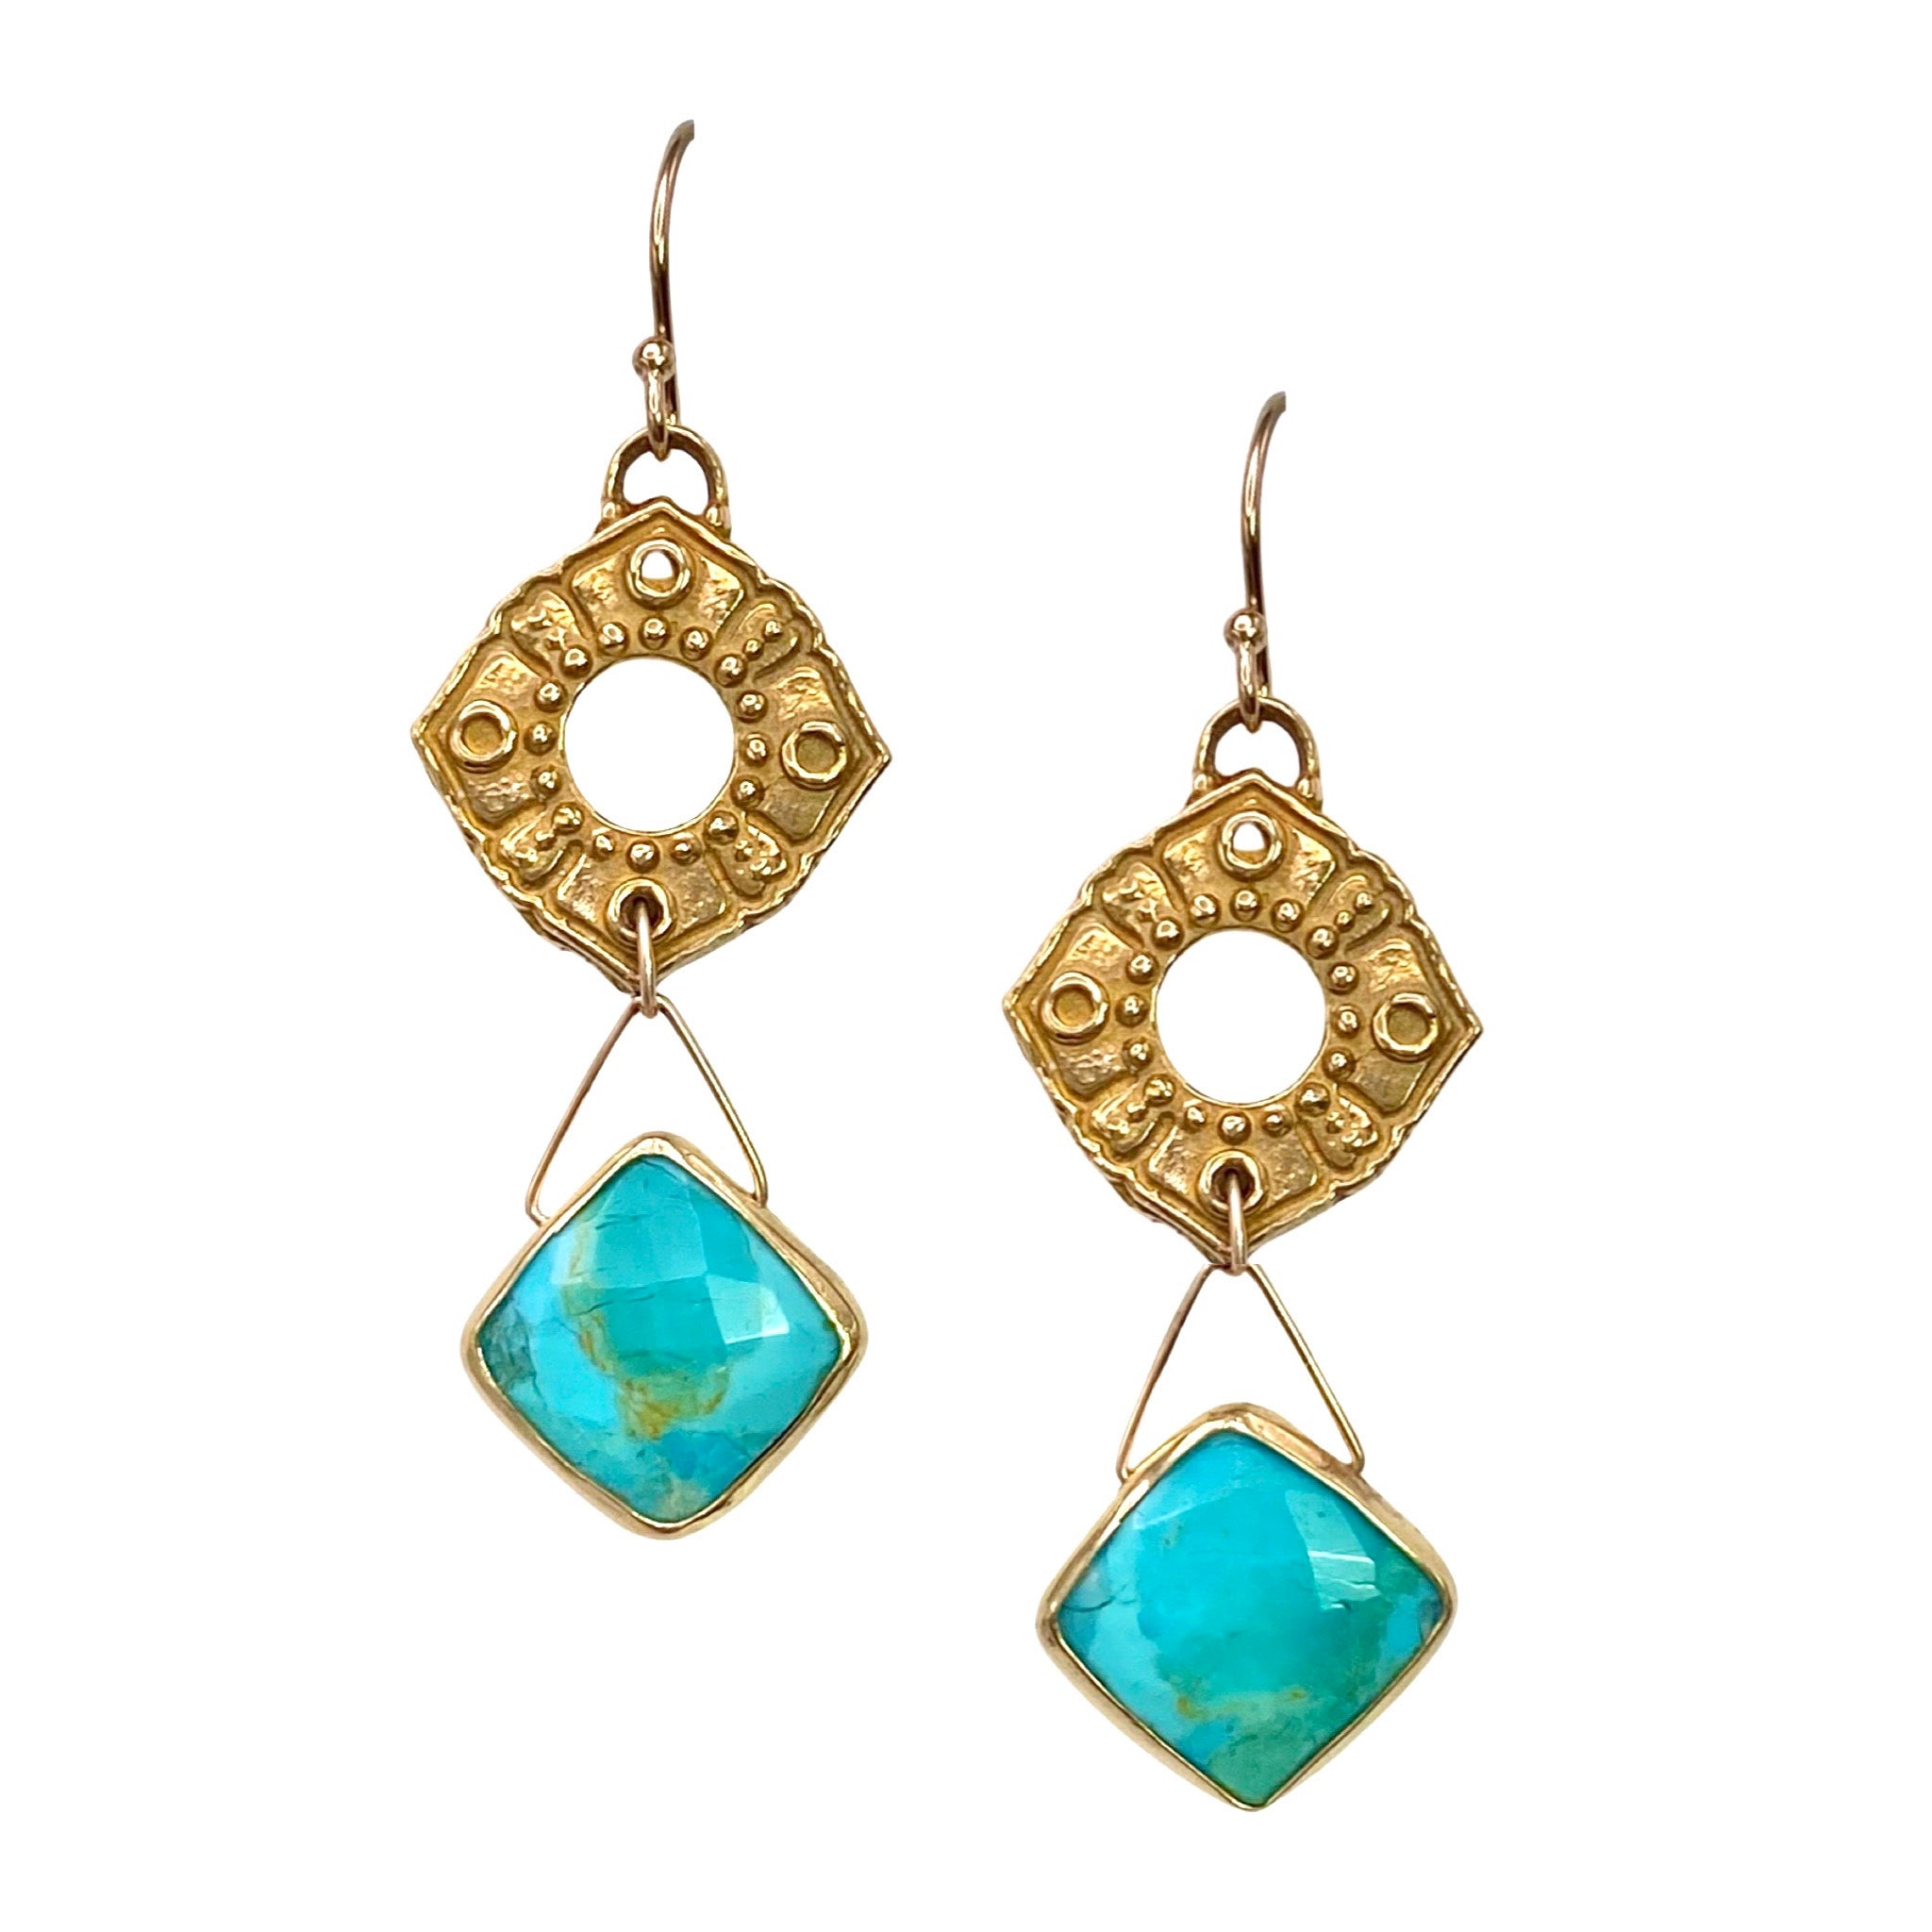 Lulu Designs Poppy Earrings - Available at Shaylula Jewlery & Gifts in Tarrytown, NY and online. Lulu lovers get the royal treatment with these Poppy earrings - a hand-cast yellow bronze Anahata (also known as the heart chakra) charm gives way to cushion cut turquoise gem edged in 18k gold vermeil. Made with love in Mill Valley, CA. (Model is wearing moonstone version.)  • Turquoise, yellow bronze, 14k gold filled  • 1.75" L  • .67" Dia. casting; 51" Dia. turquoise  • 14k gold fill earwire